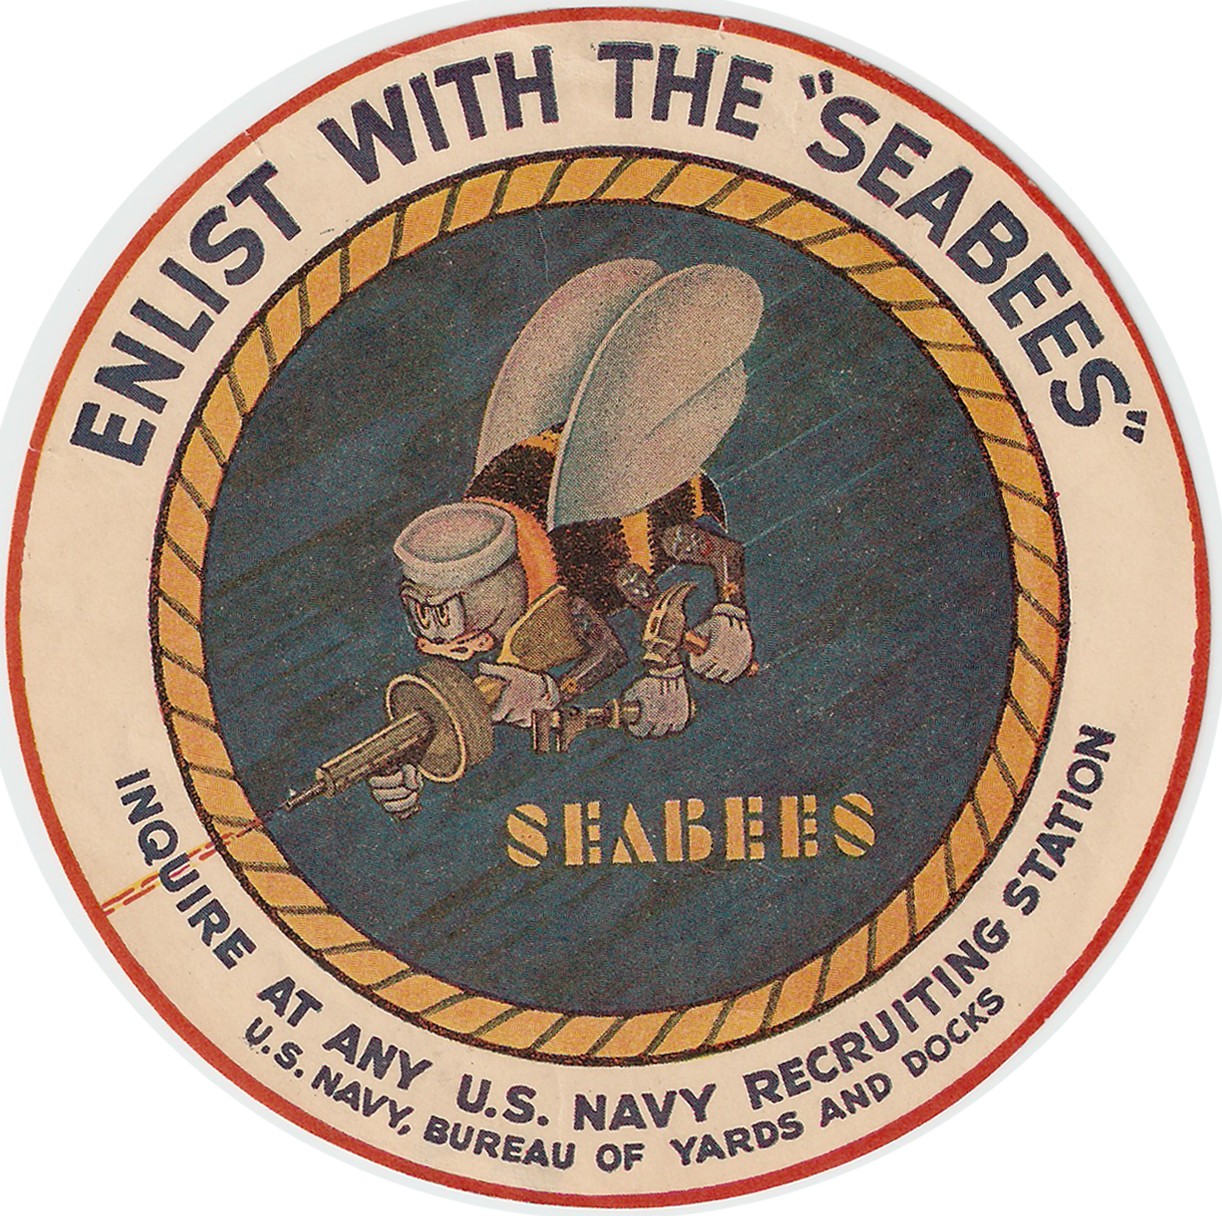 <p>Enlist with the Seabees sticker</p>
